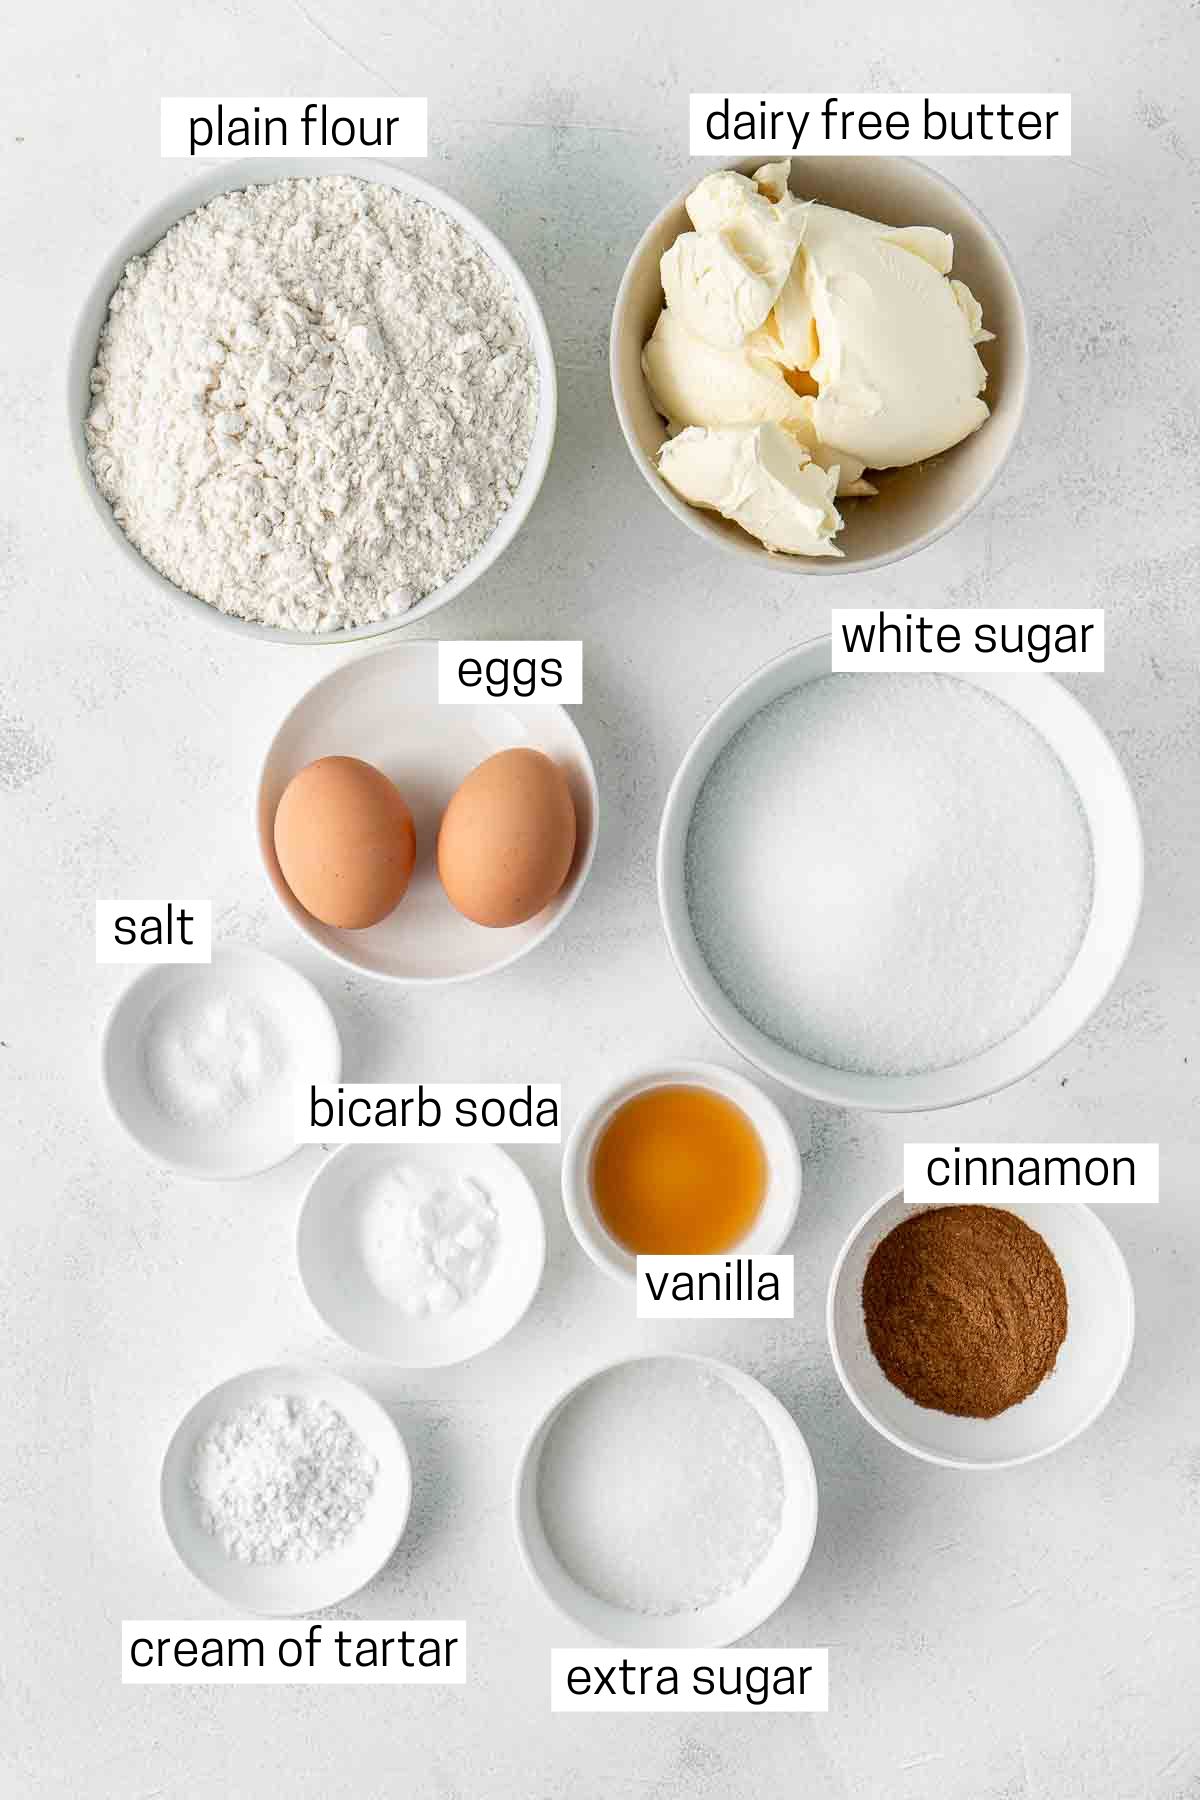 All ingredients needed for snickerdoodles laid out in small bowls.